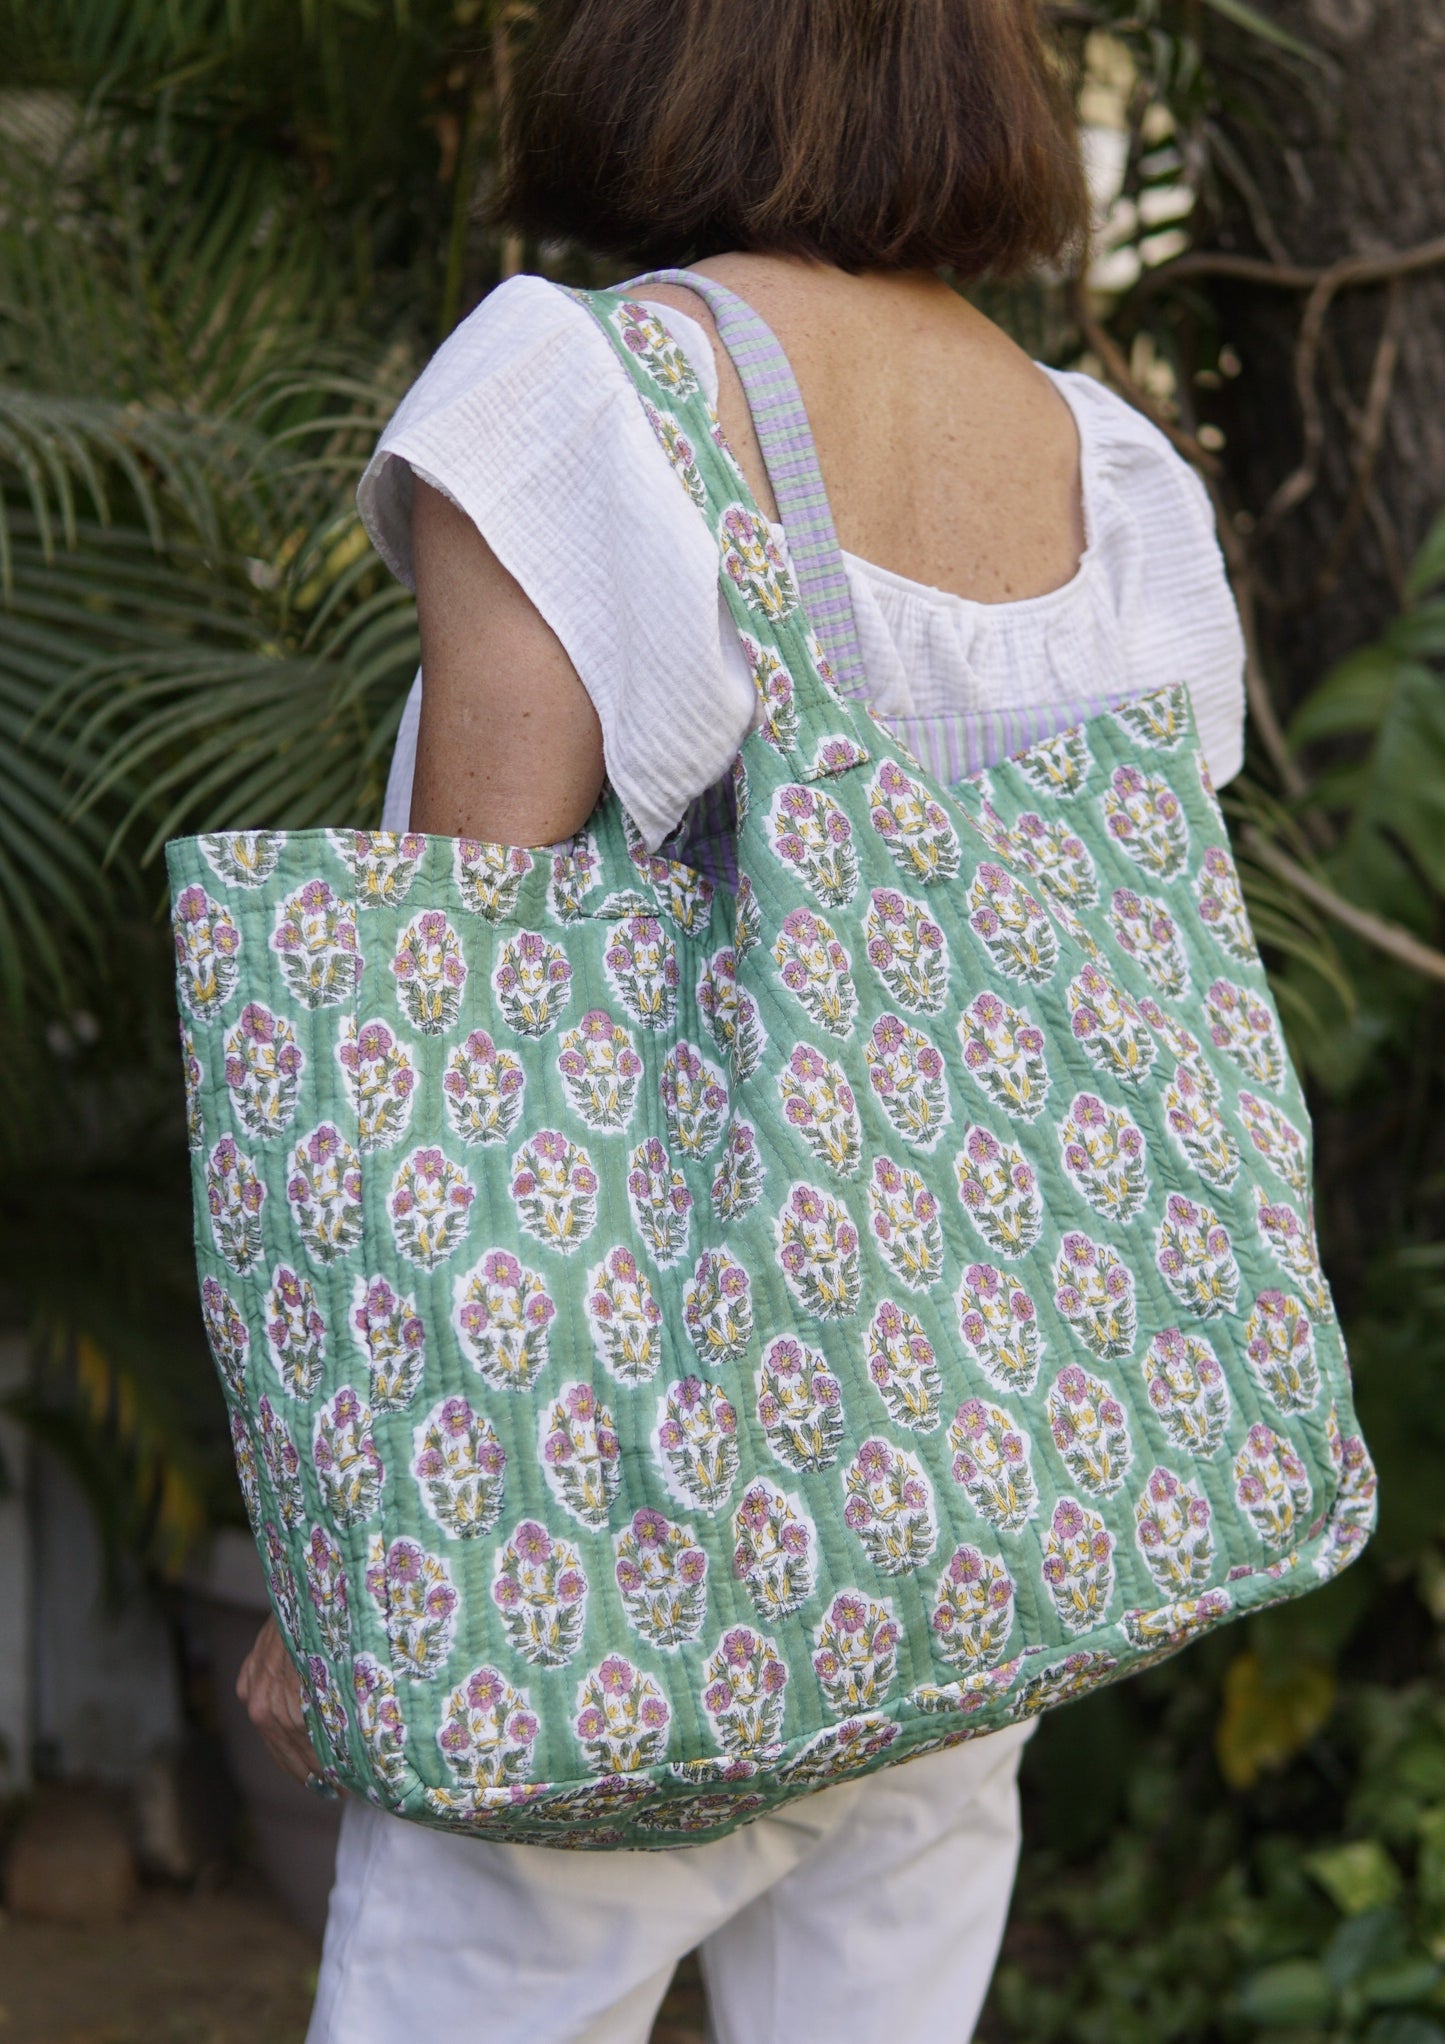 green and white beach bag blue and white beach bag, foldable beachbag, squashable beach bag XL beach bag, XL tote bag, summer bag, kantha bag, quilted cotton bag, washable Nappy bag Large tote bag, X Large cotton shopper bag block print cotton bag , yoga bag,nappy bag beach bagBeach bag, Green and ;ilac Provencale print with coordinating lining, X Large cotton, block printed tote bag. Handmade. 